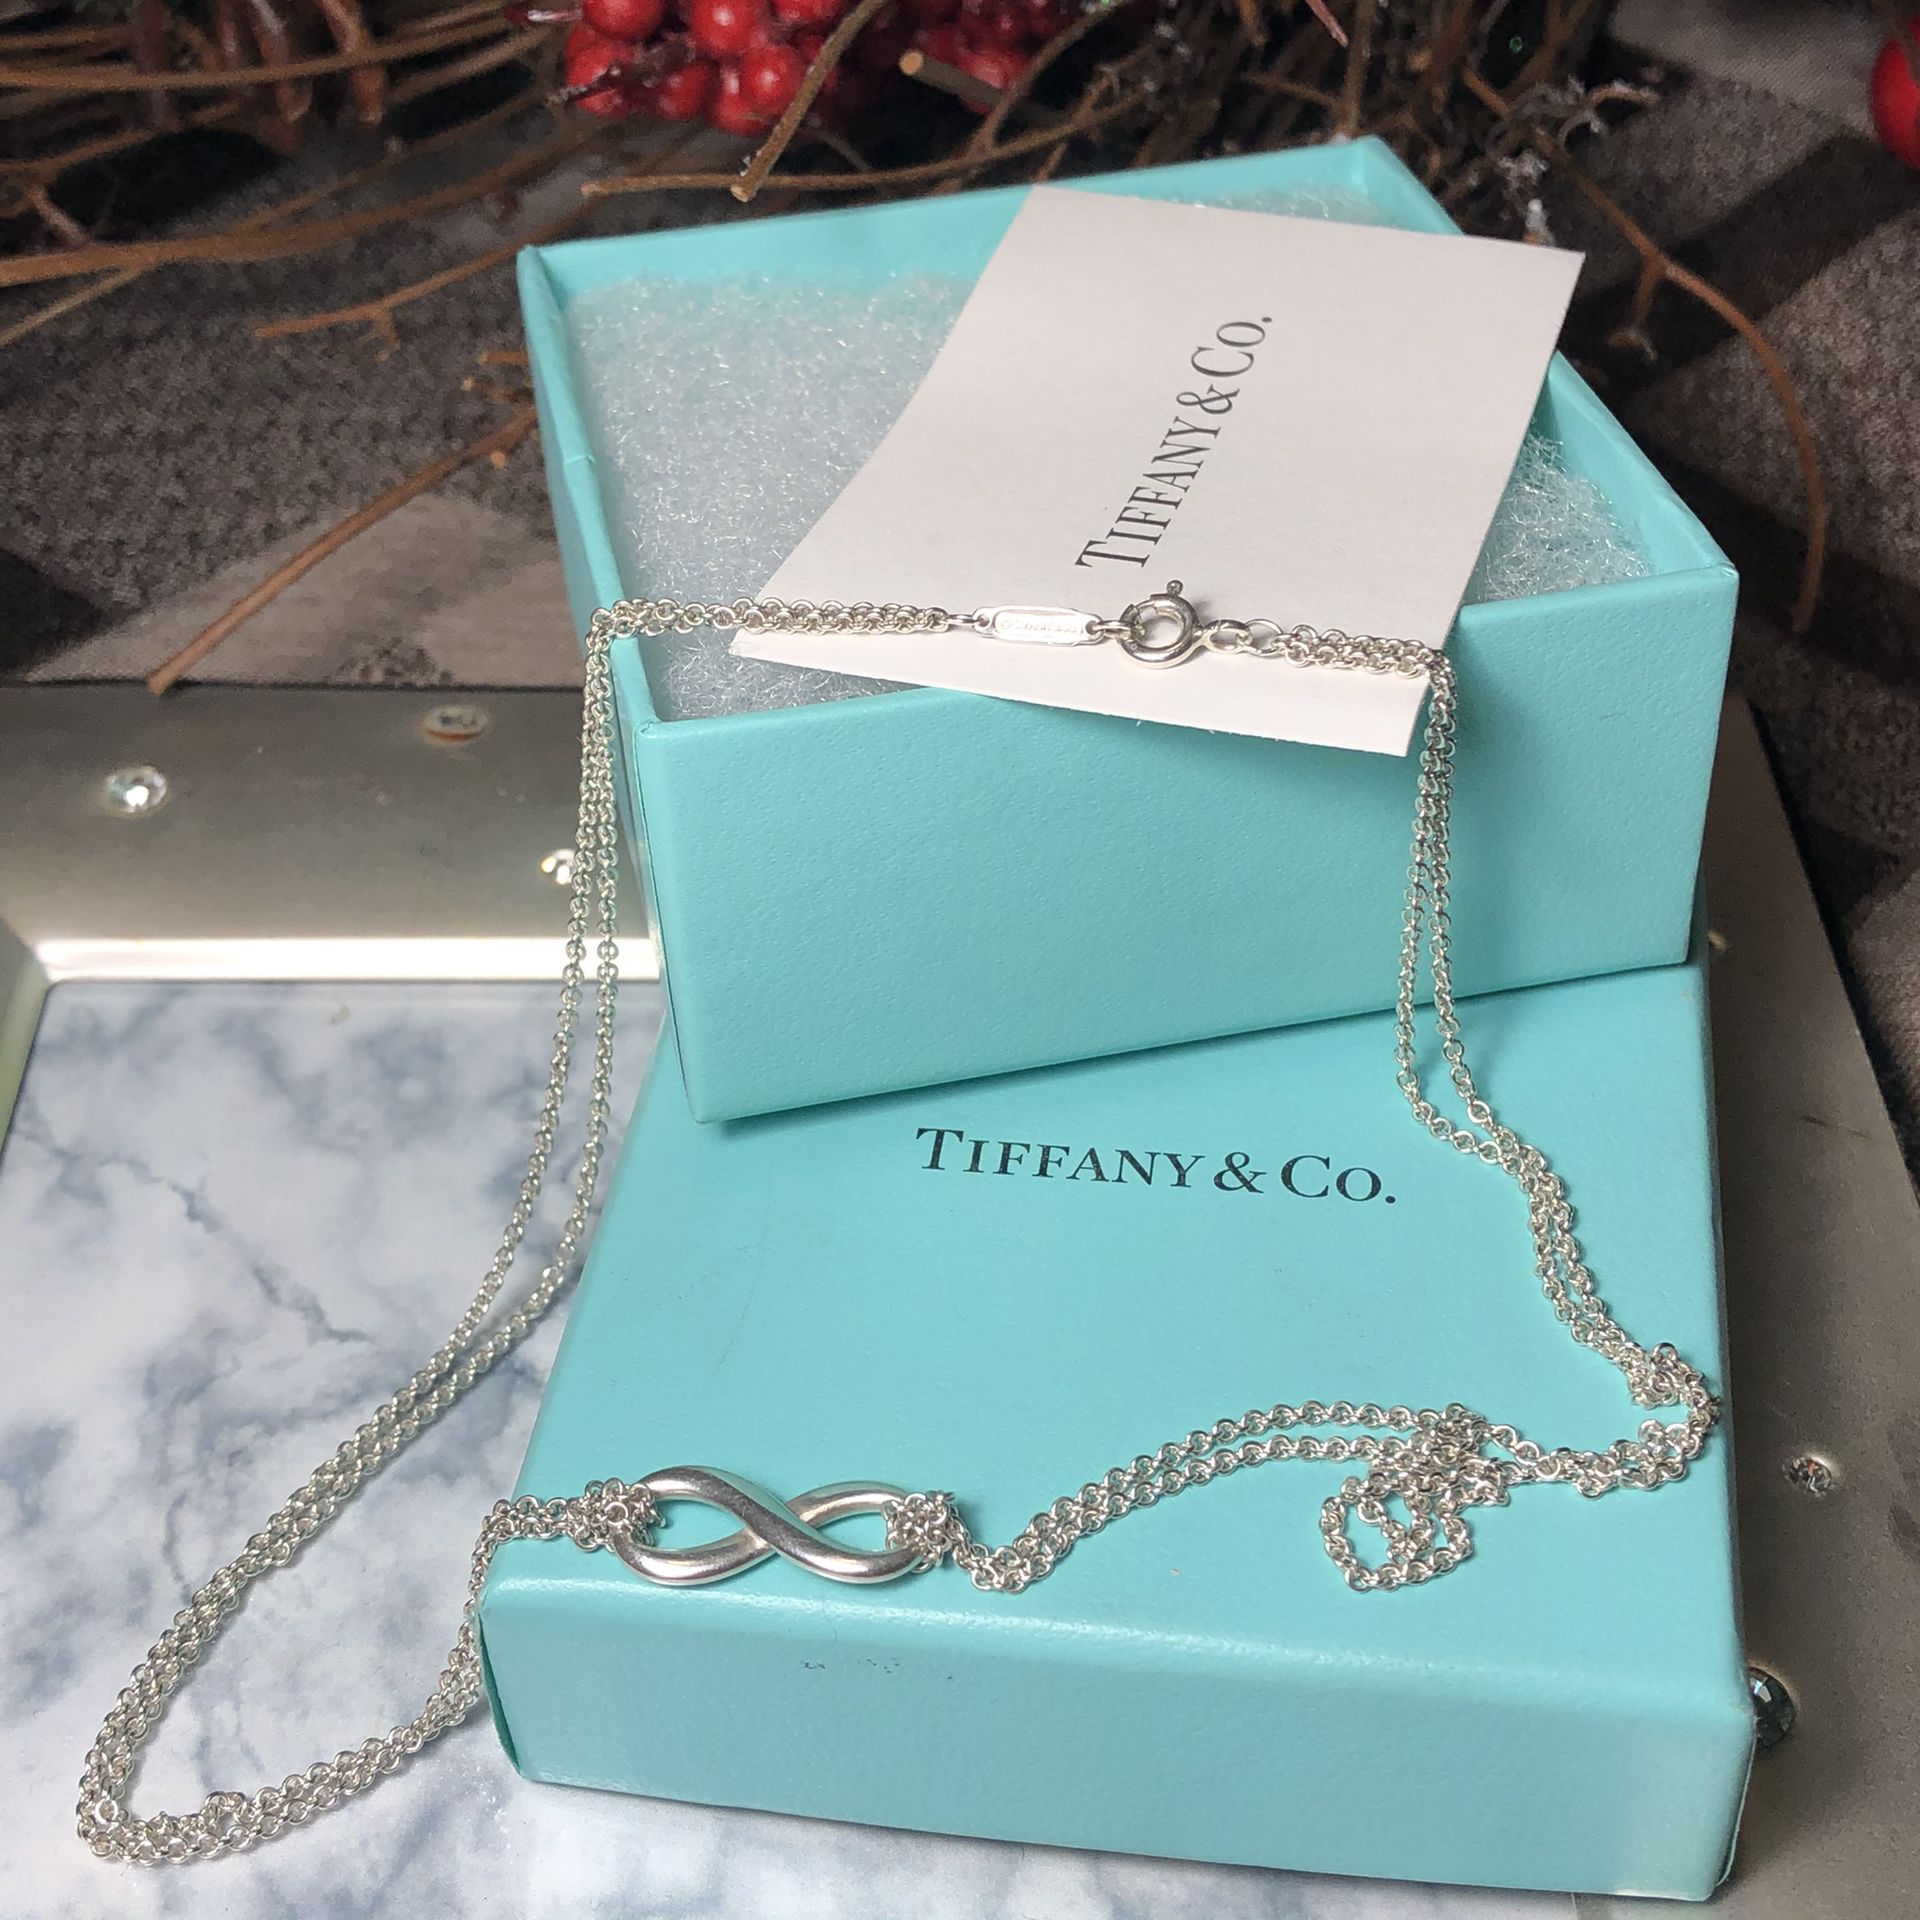 Tiffany & Co Sterling Silver Infinity Pendant Double Chain Necklace in Box 16"